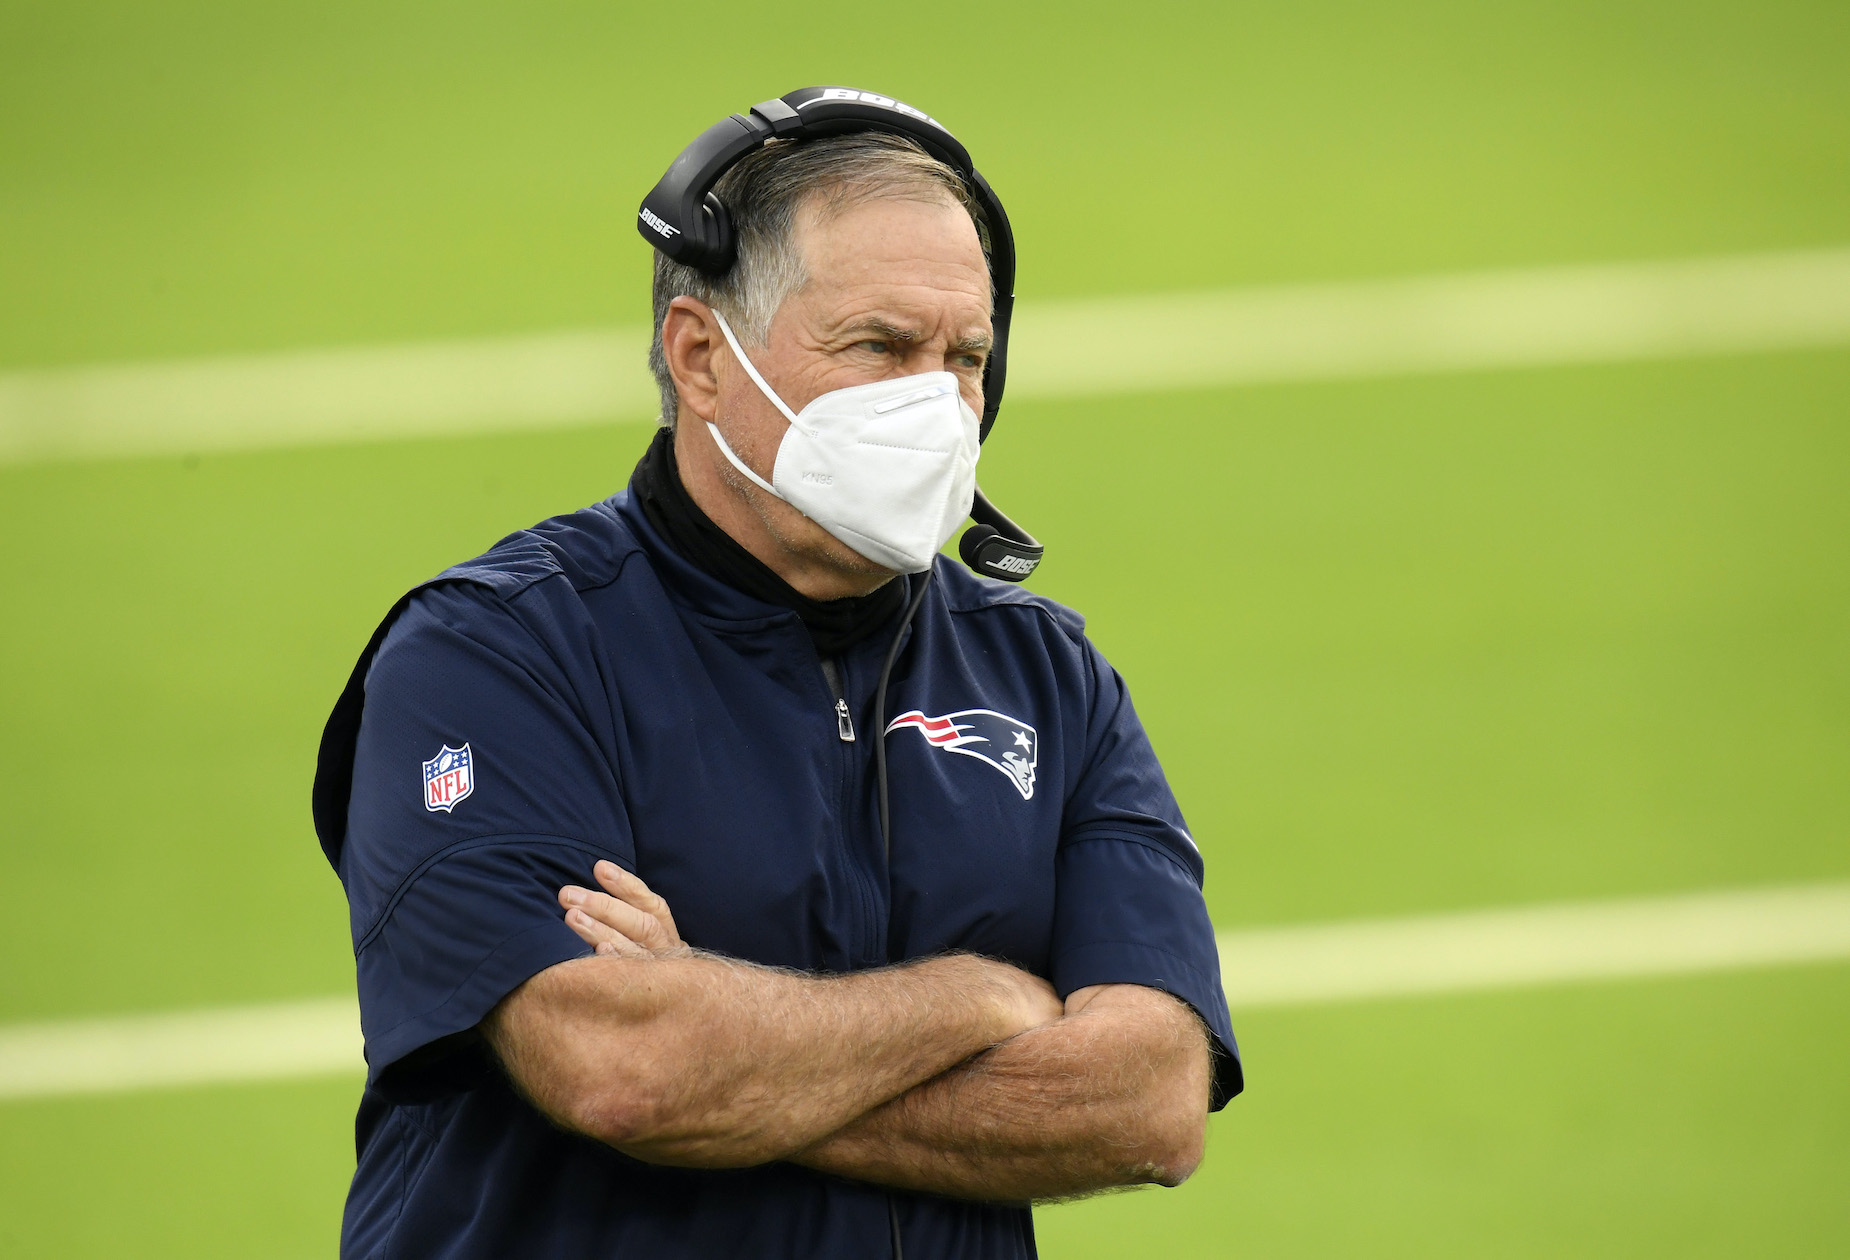 New England Patriots head coach Bill Belichick stands on the sidelines during a 2020 NFL game.